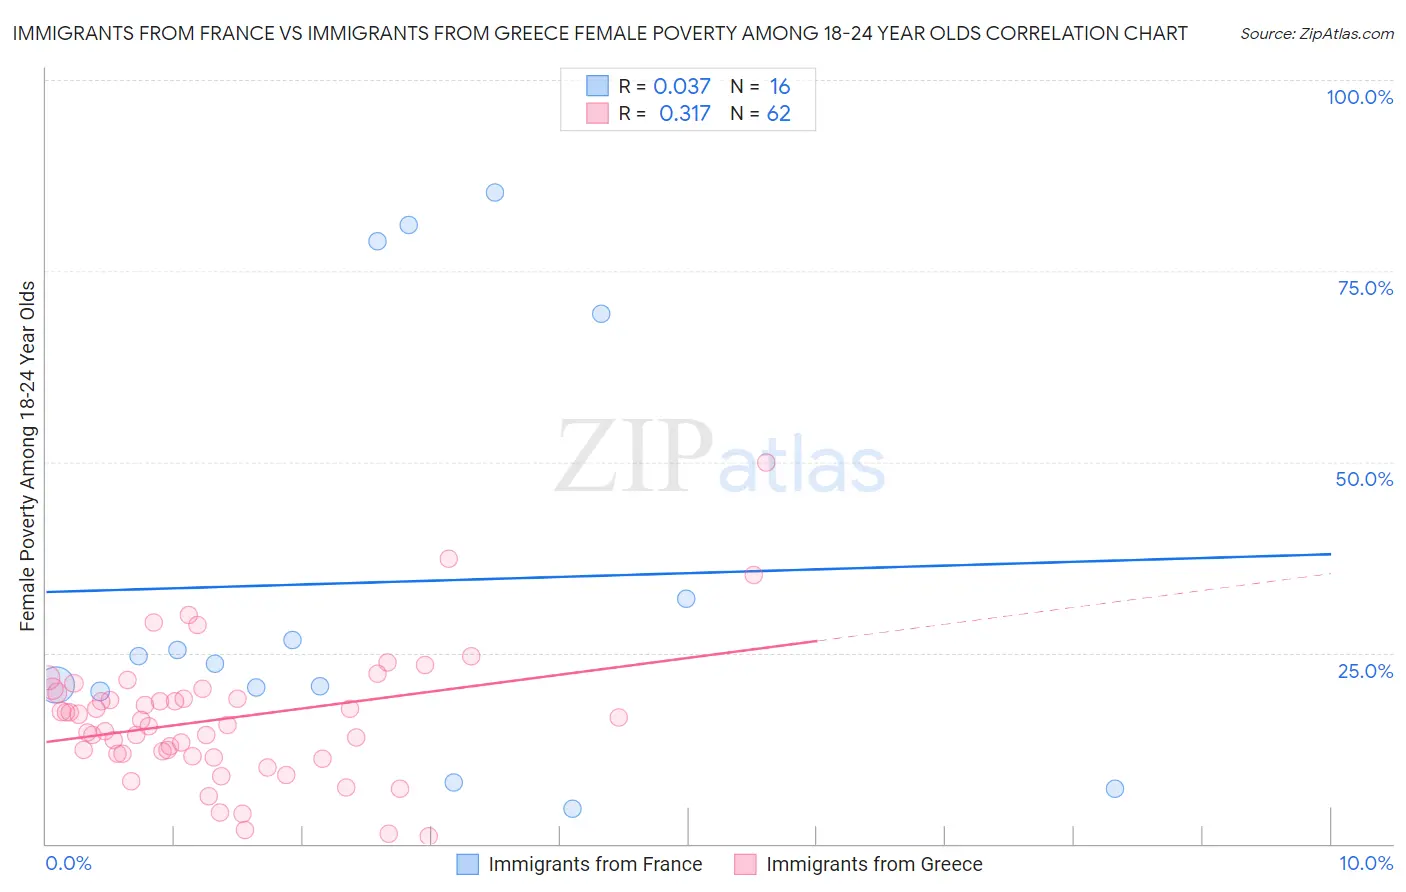 Immigrants from France vs Immigrants from Greece Female Poverty Among 18-24 Year Olds